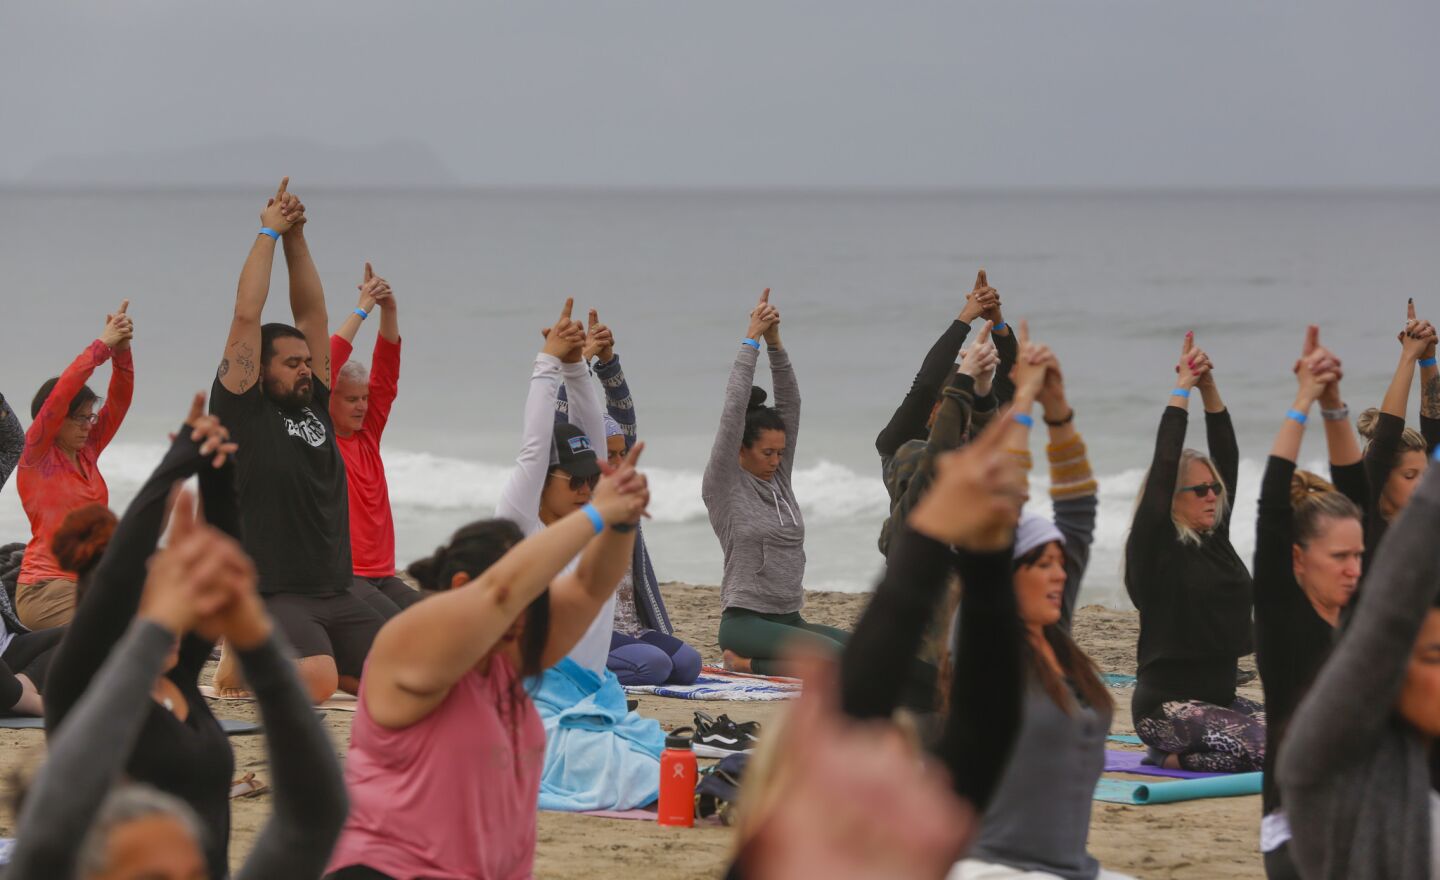 At the San Diego Yoga Festival held in Imperial Beach, several participants took part in morning yoga session held Sunday morning on the sand near the Imperial Beach Pier.